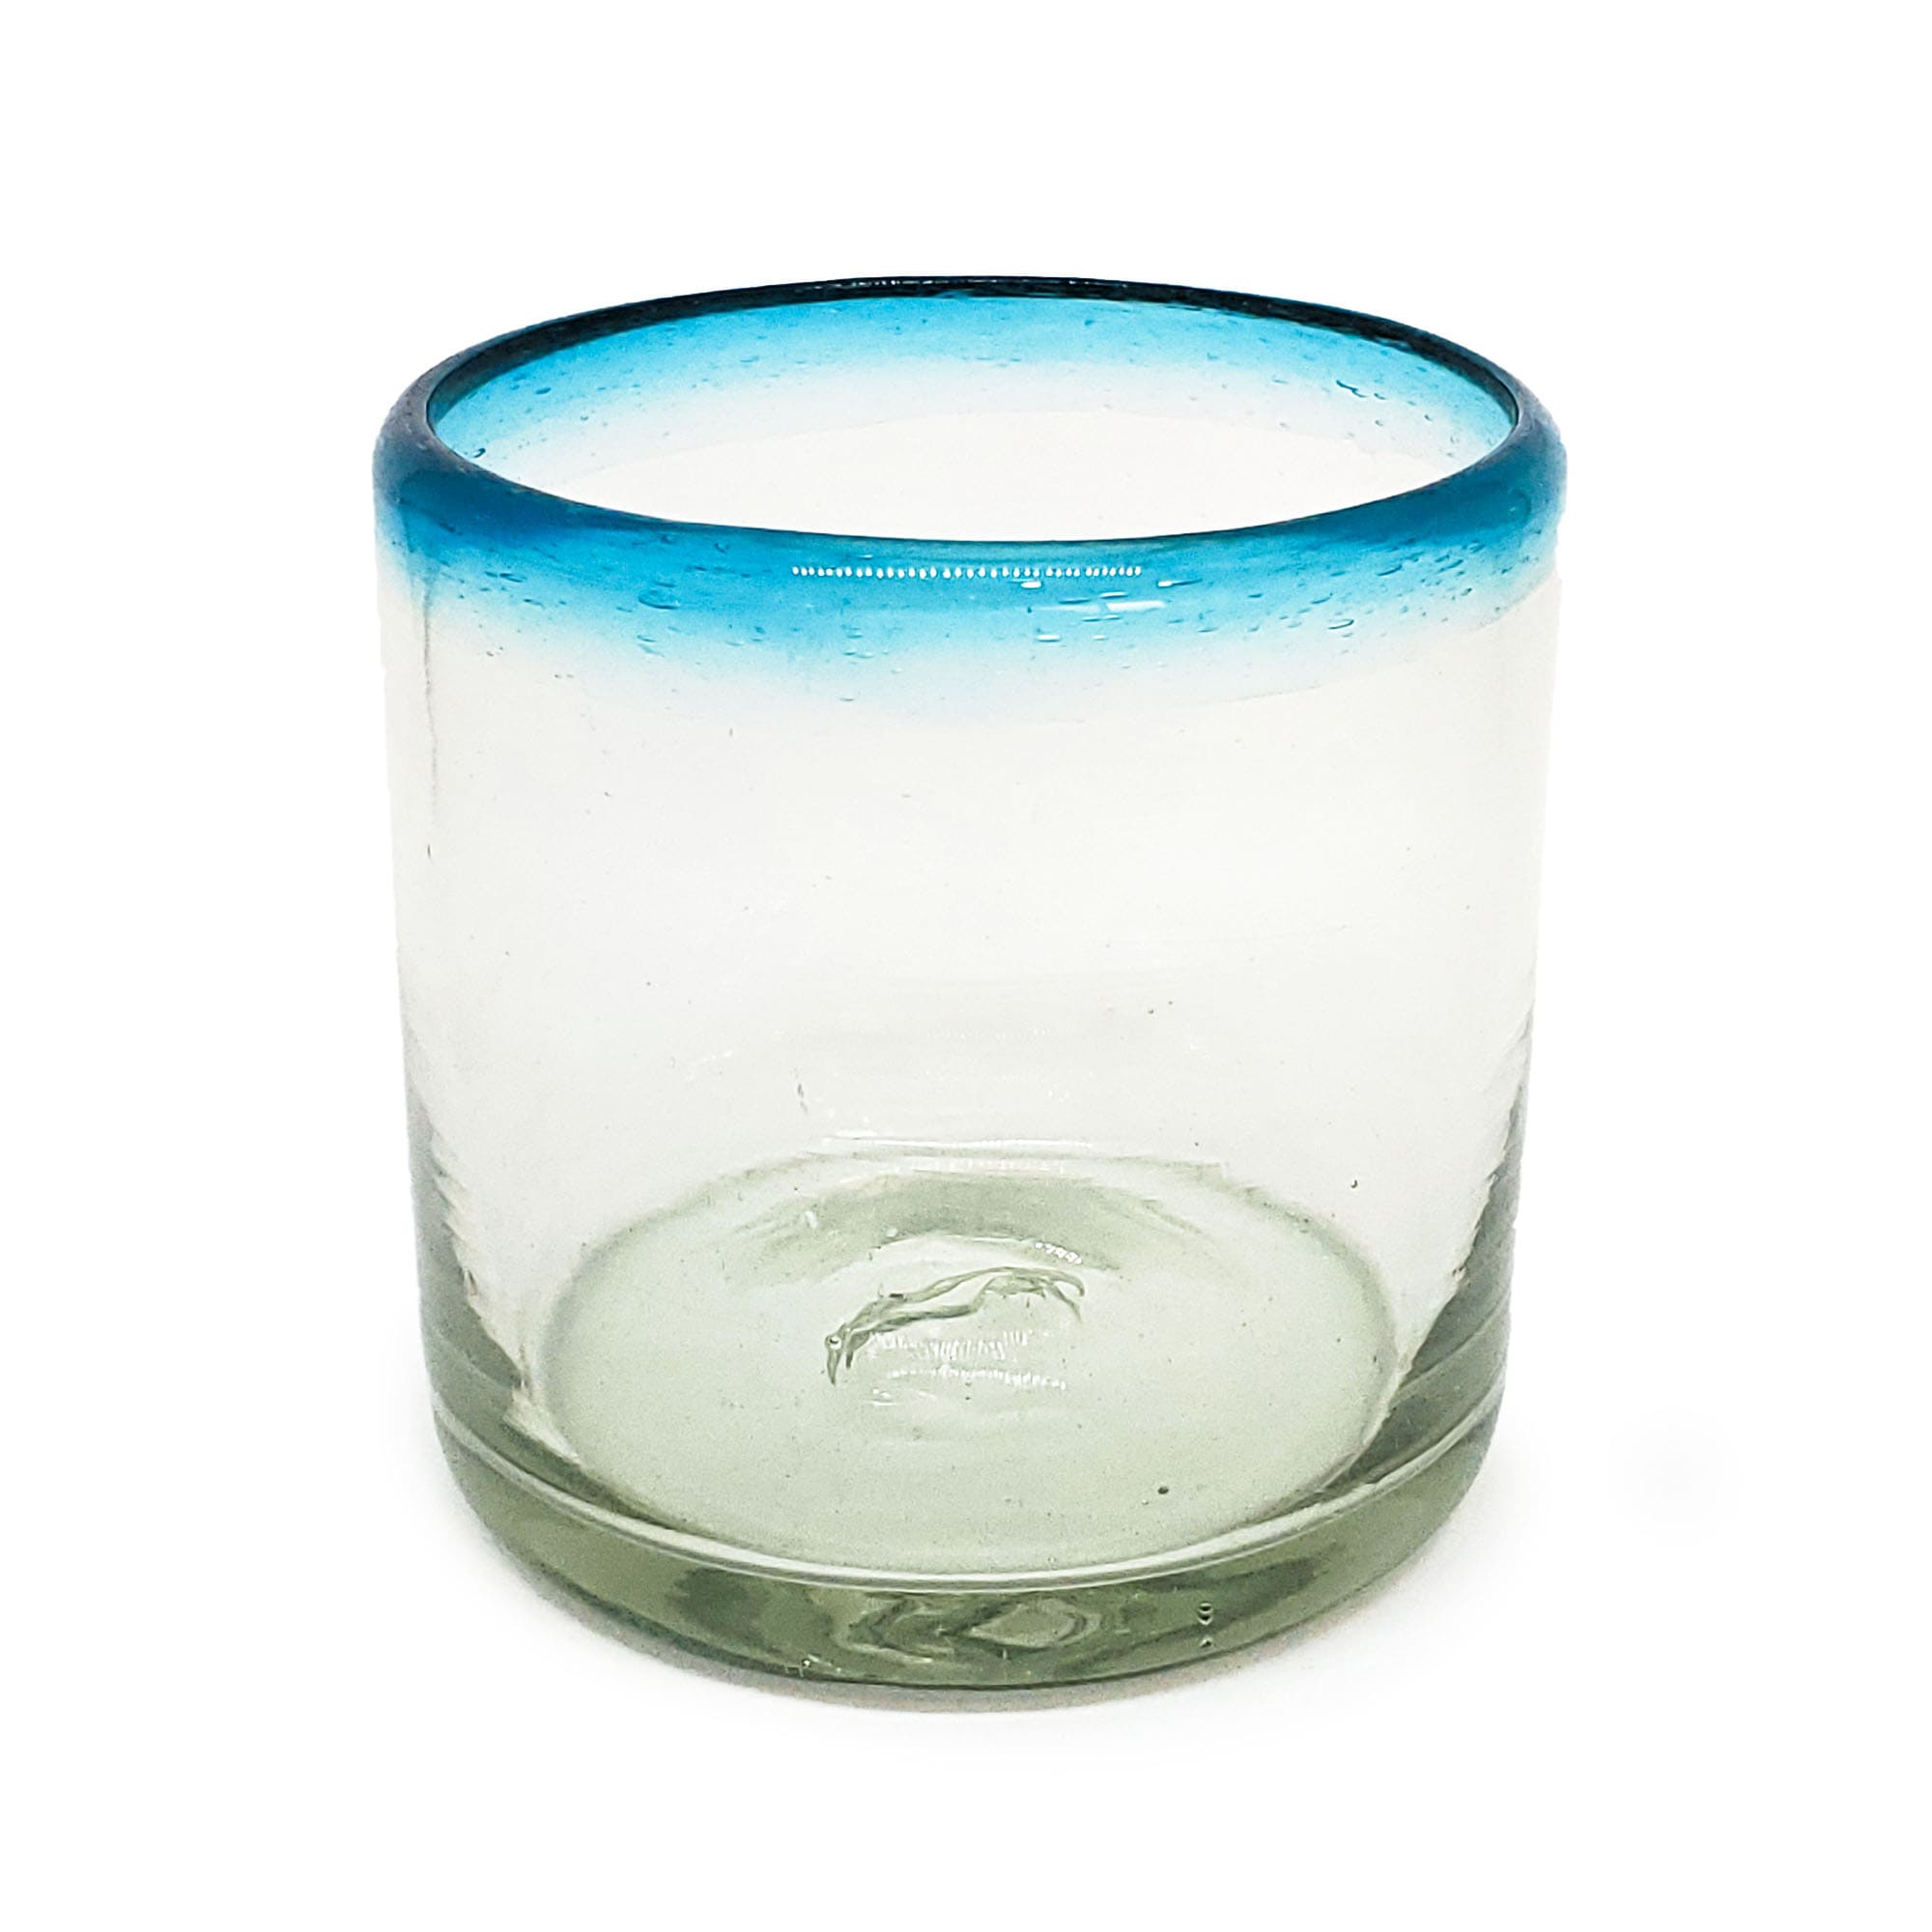 MEXICAN GLASSWARE / Aqua Blue Rim 8 oz DOF Rock Glasses (set of 6) / These glasses are just the right size to enjoy fresh squeezed fruit juice in the moning.